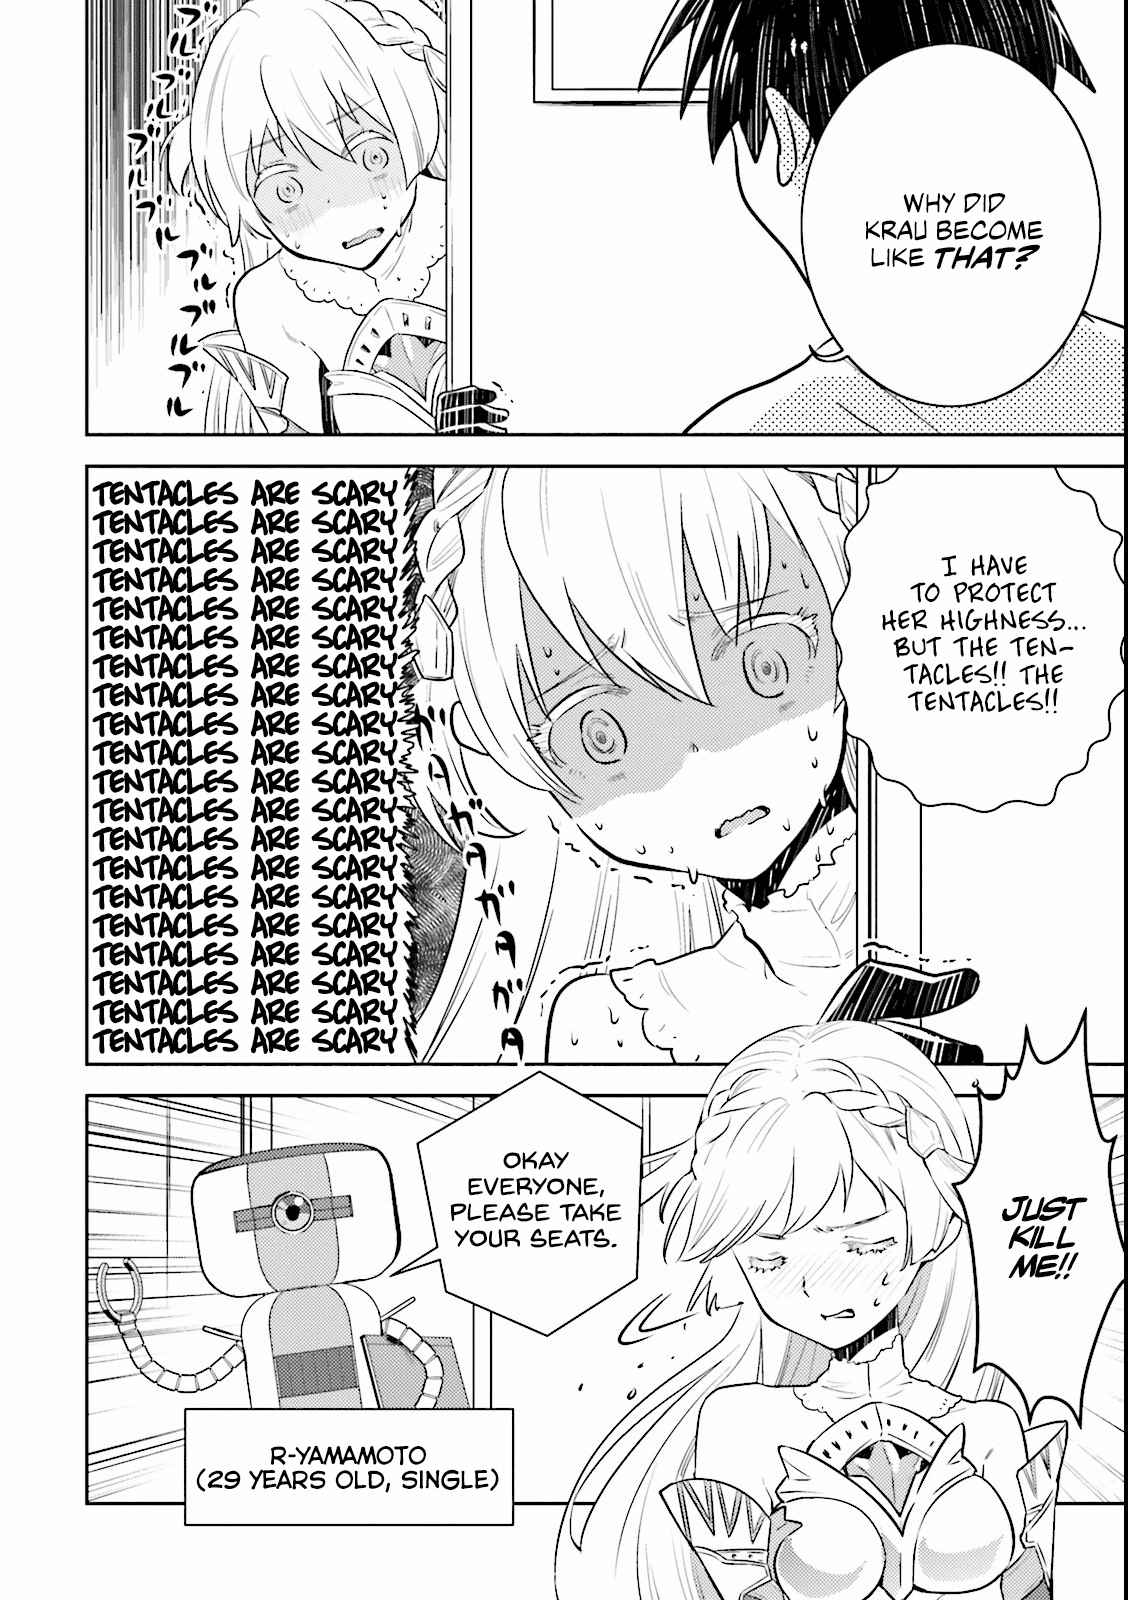 Why not go to JUSCO with me, Valkyrie? Vol. 1 Ch. 5